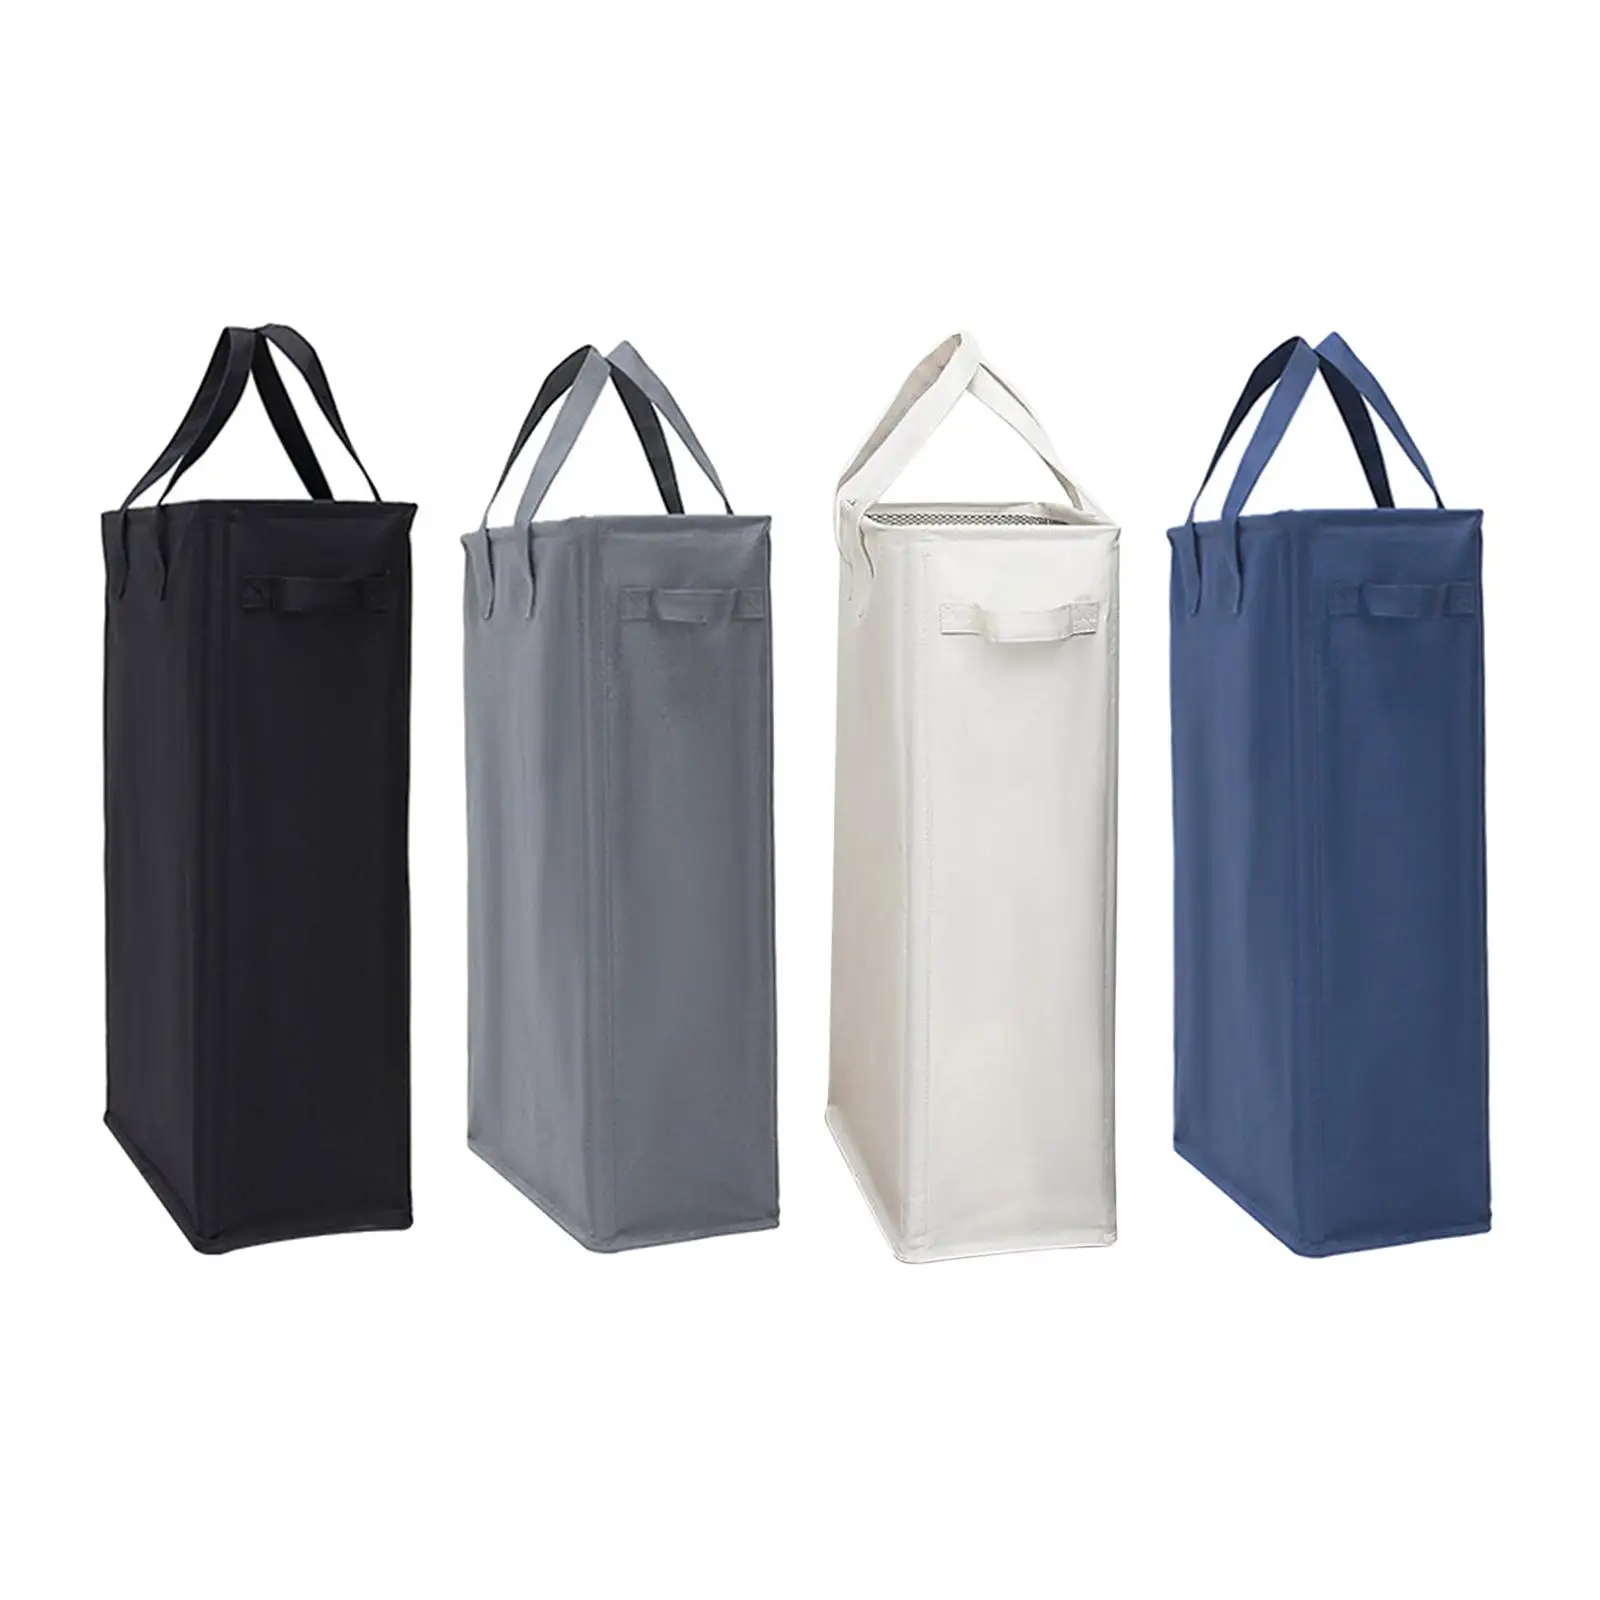 Large Laundry Bag Folding for Closet Household College Dorm Living Room Laundry Room